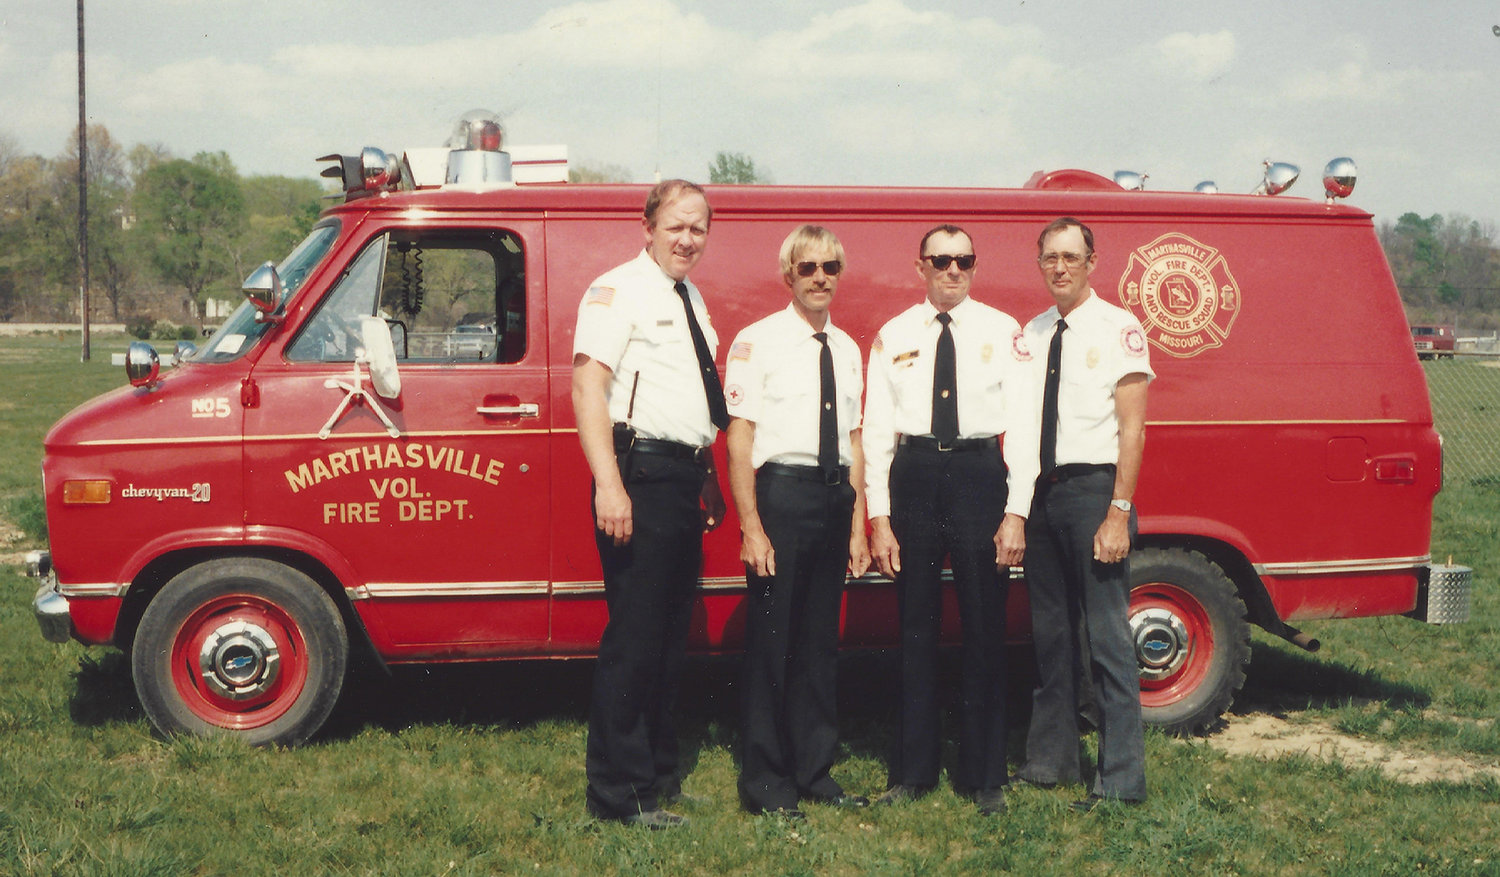 THROUGH THE YEARS — Then-Asst. Chief Jim Buescher, left, is pictured with fellow Marthasville Fire Department volunteers in 1986. Pictured, from left, are Buescher, Chief Larry Ballmann, Retired Chief Frank Pohl, and Asst. Chief Murrill Wohler.